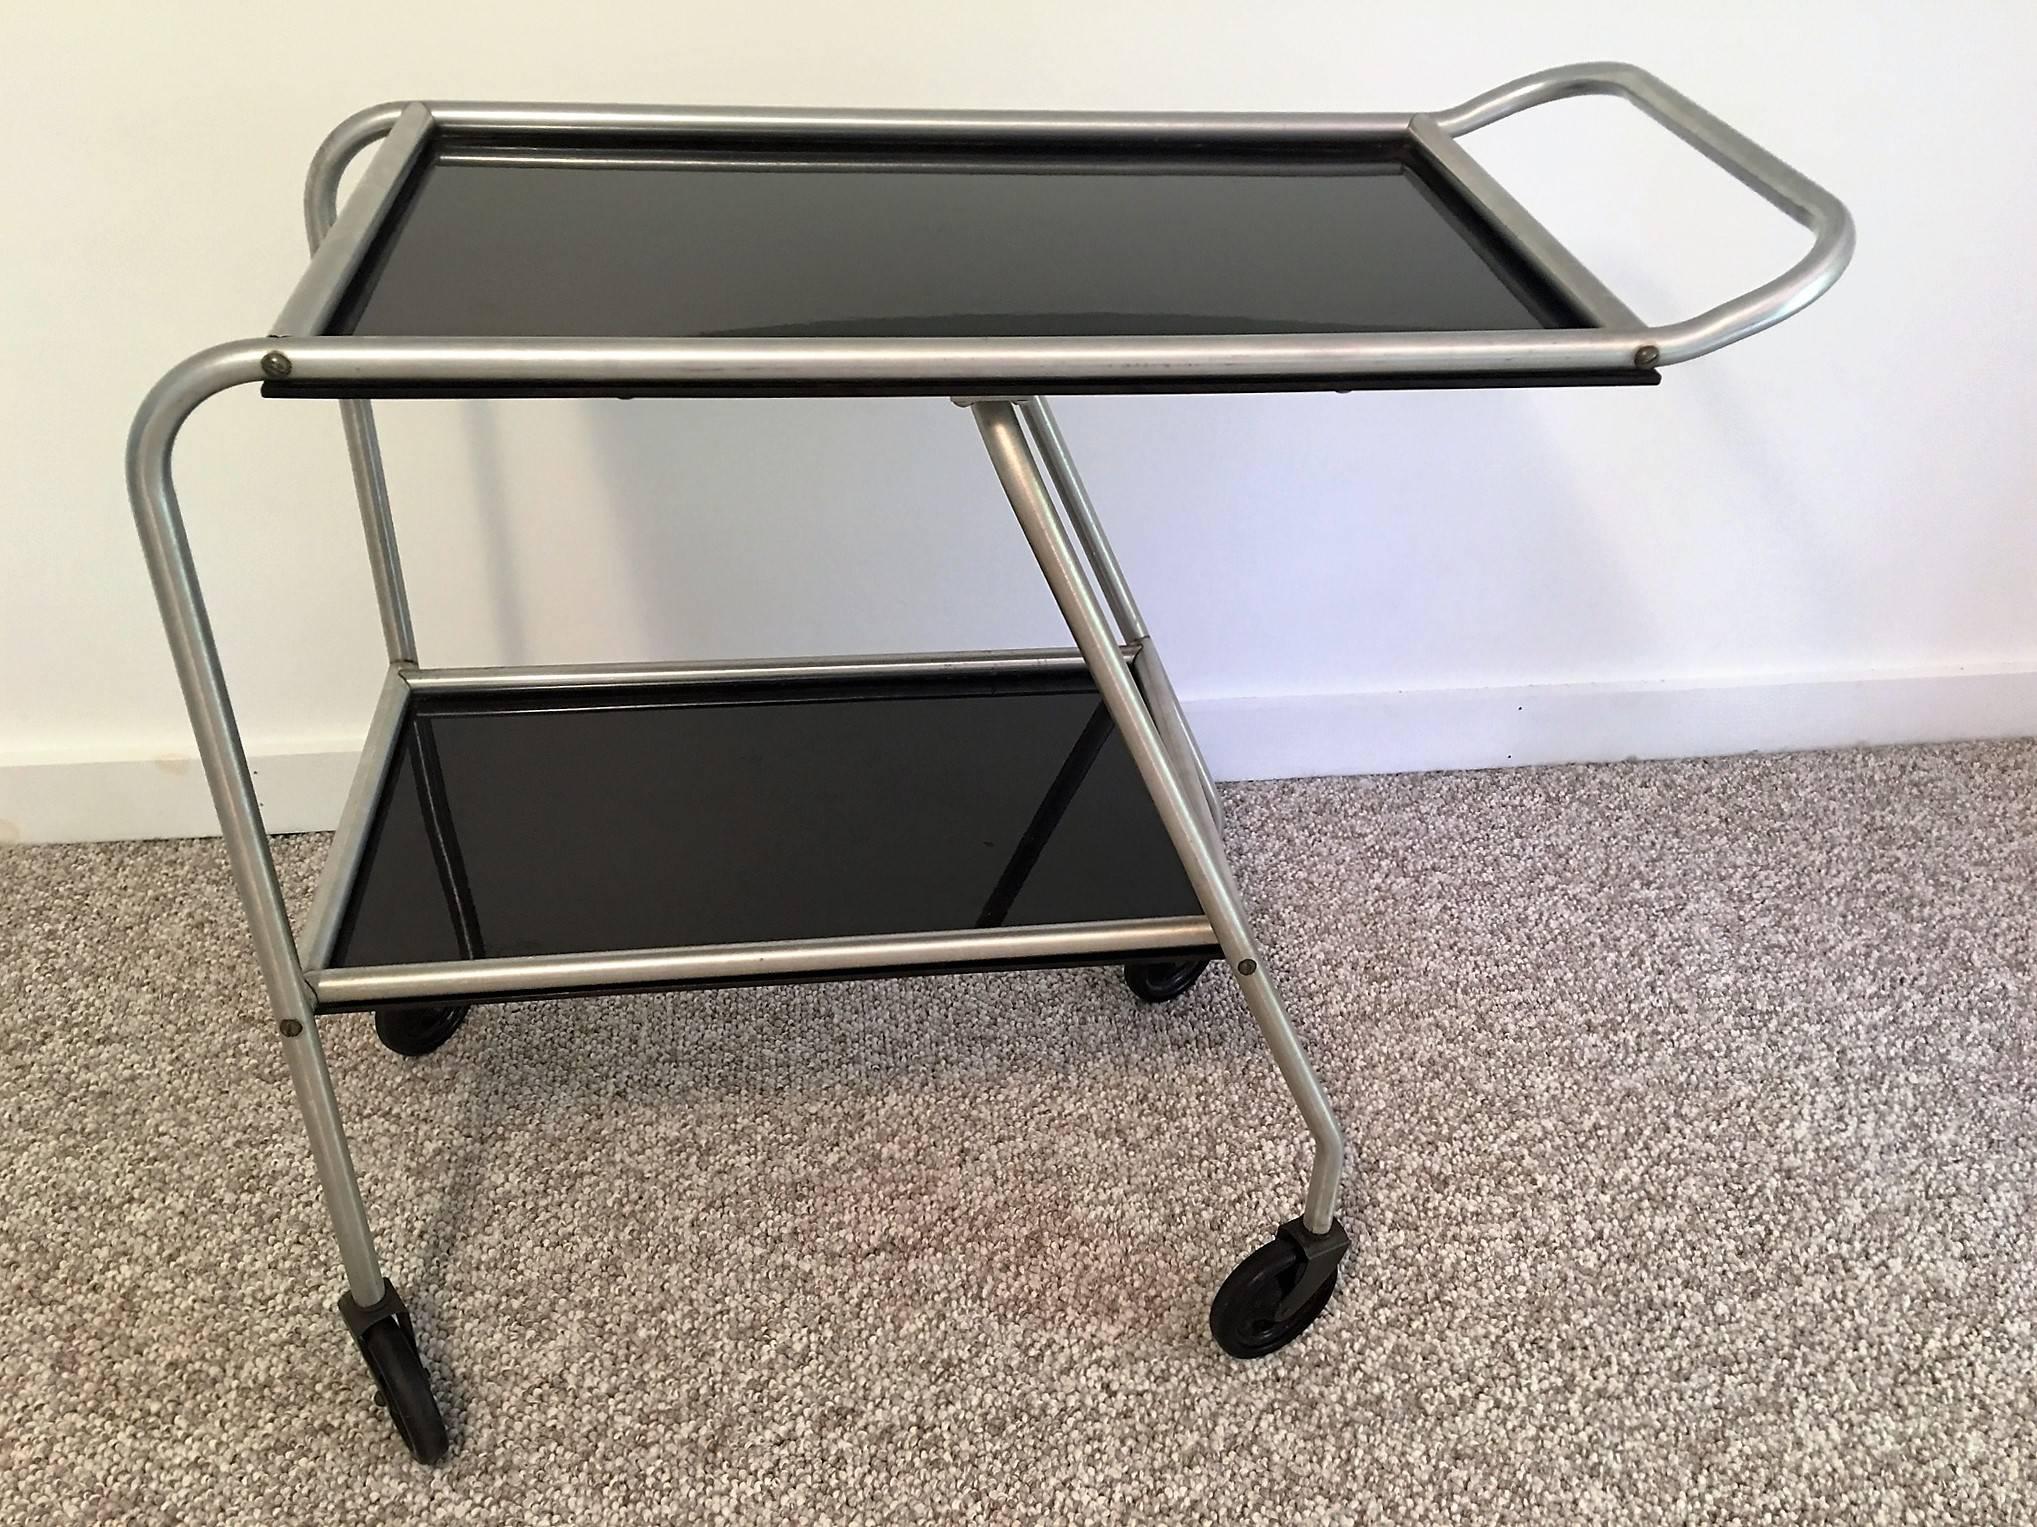 A great iconic bar cart designed in the 1930s called the aero art bar cart made by Frantz industries. Used in the 1930s on the DC-3 airplane by stewardesses serving cocktails. Composed of black bakelite and aluminum this aerodynamic cocktail cart is